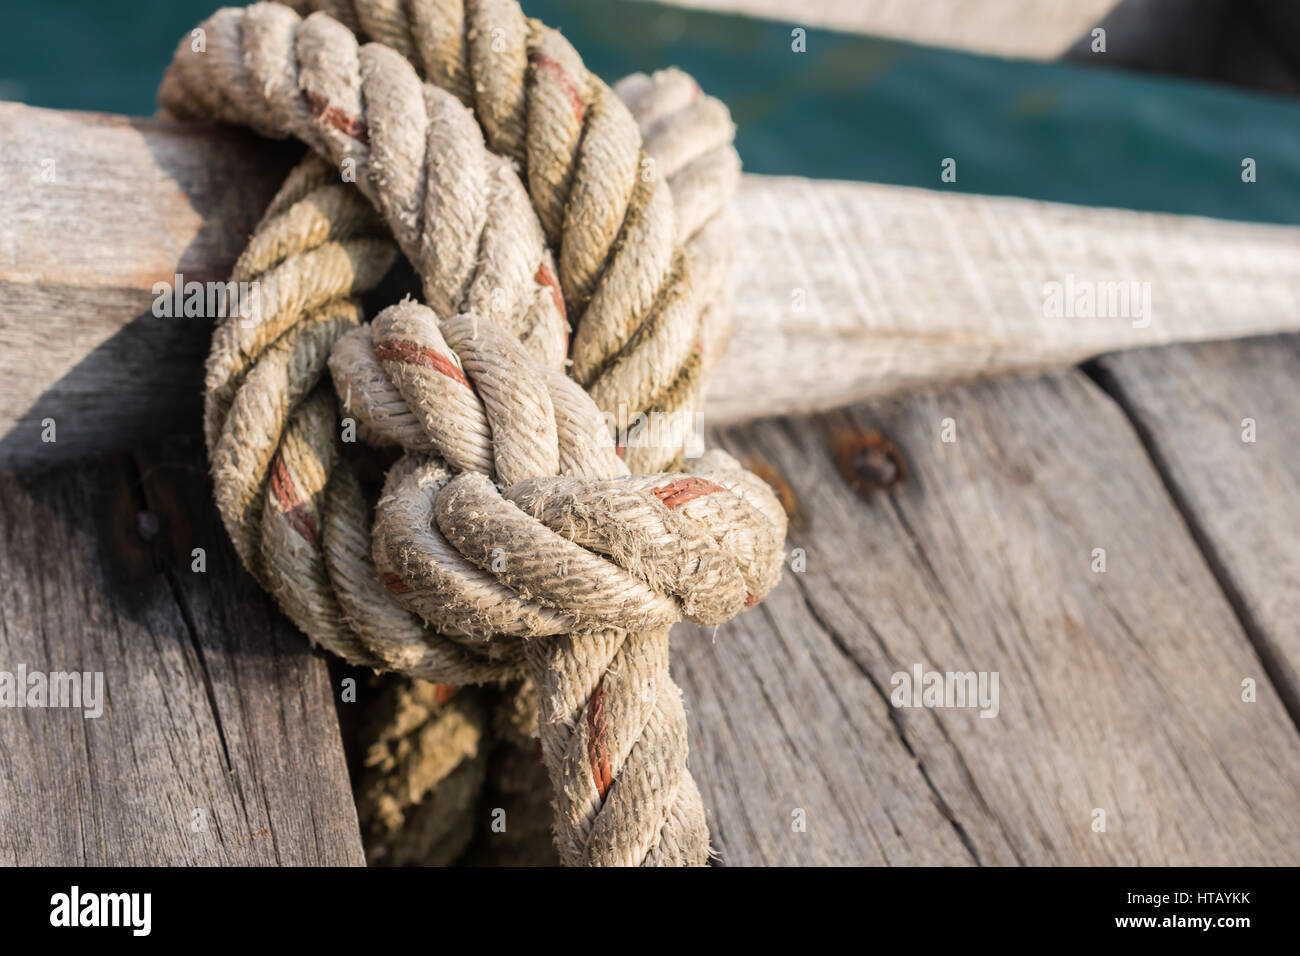 Rope string Stock Photo by ©PicsFive 27009903